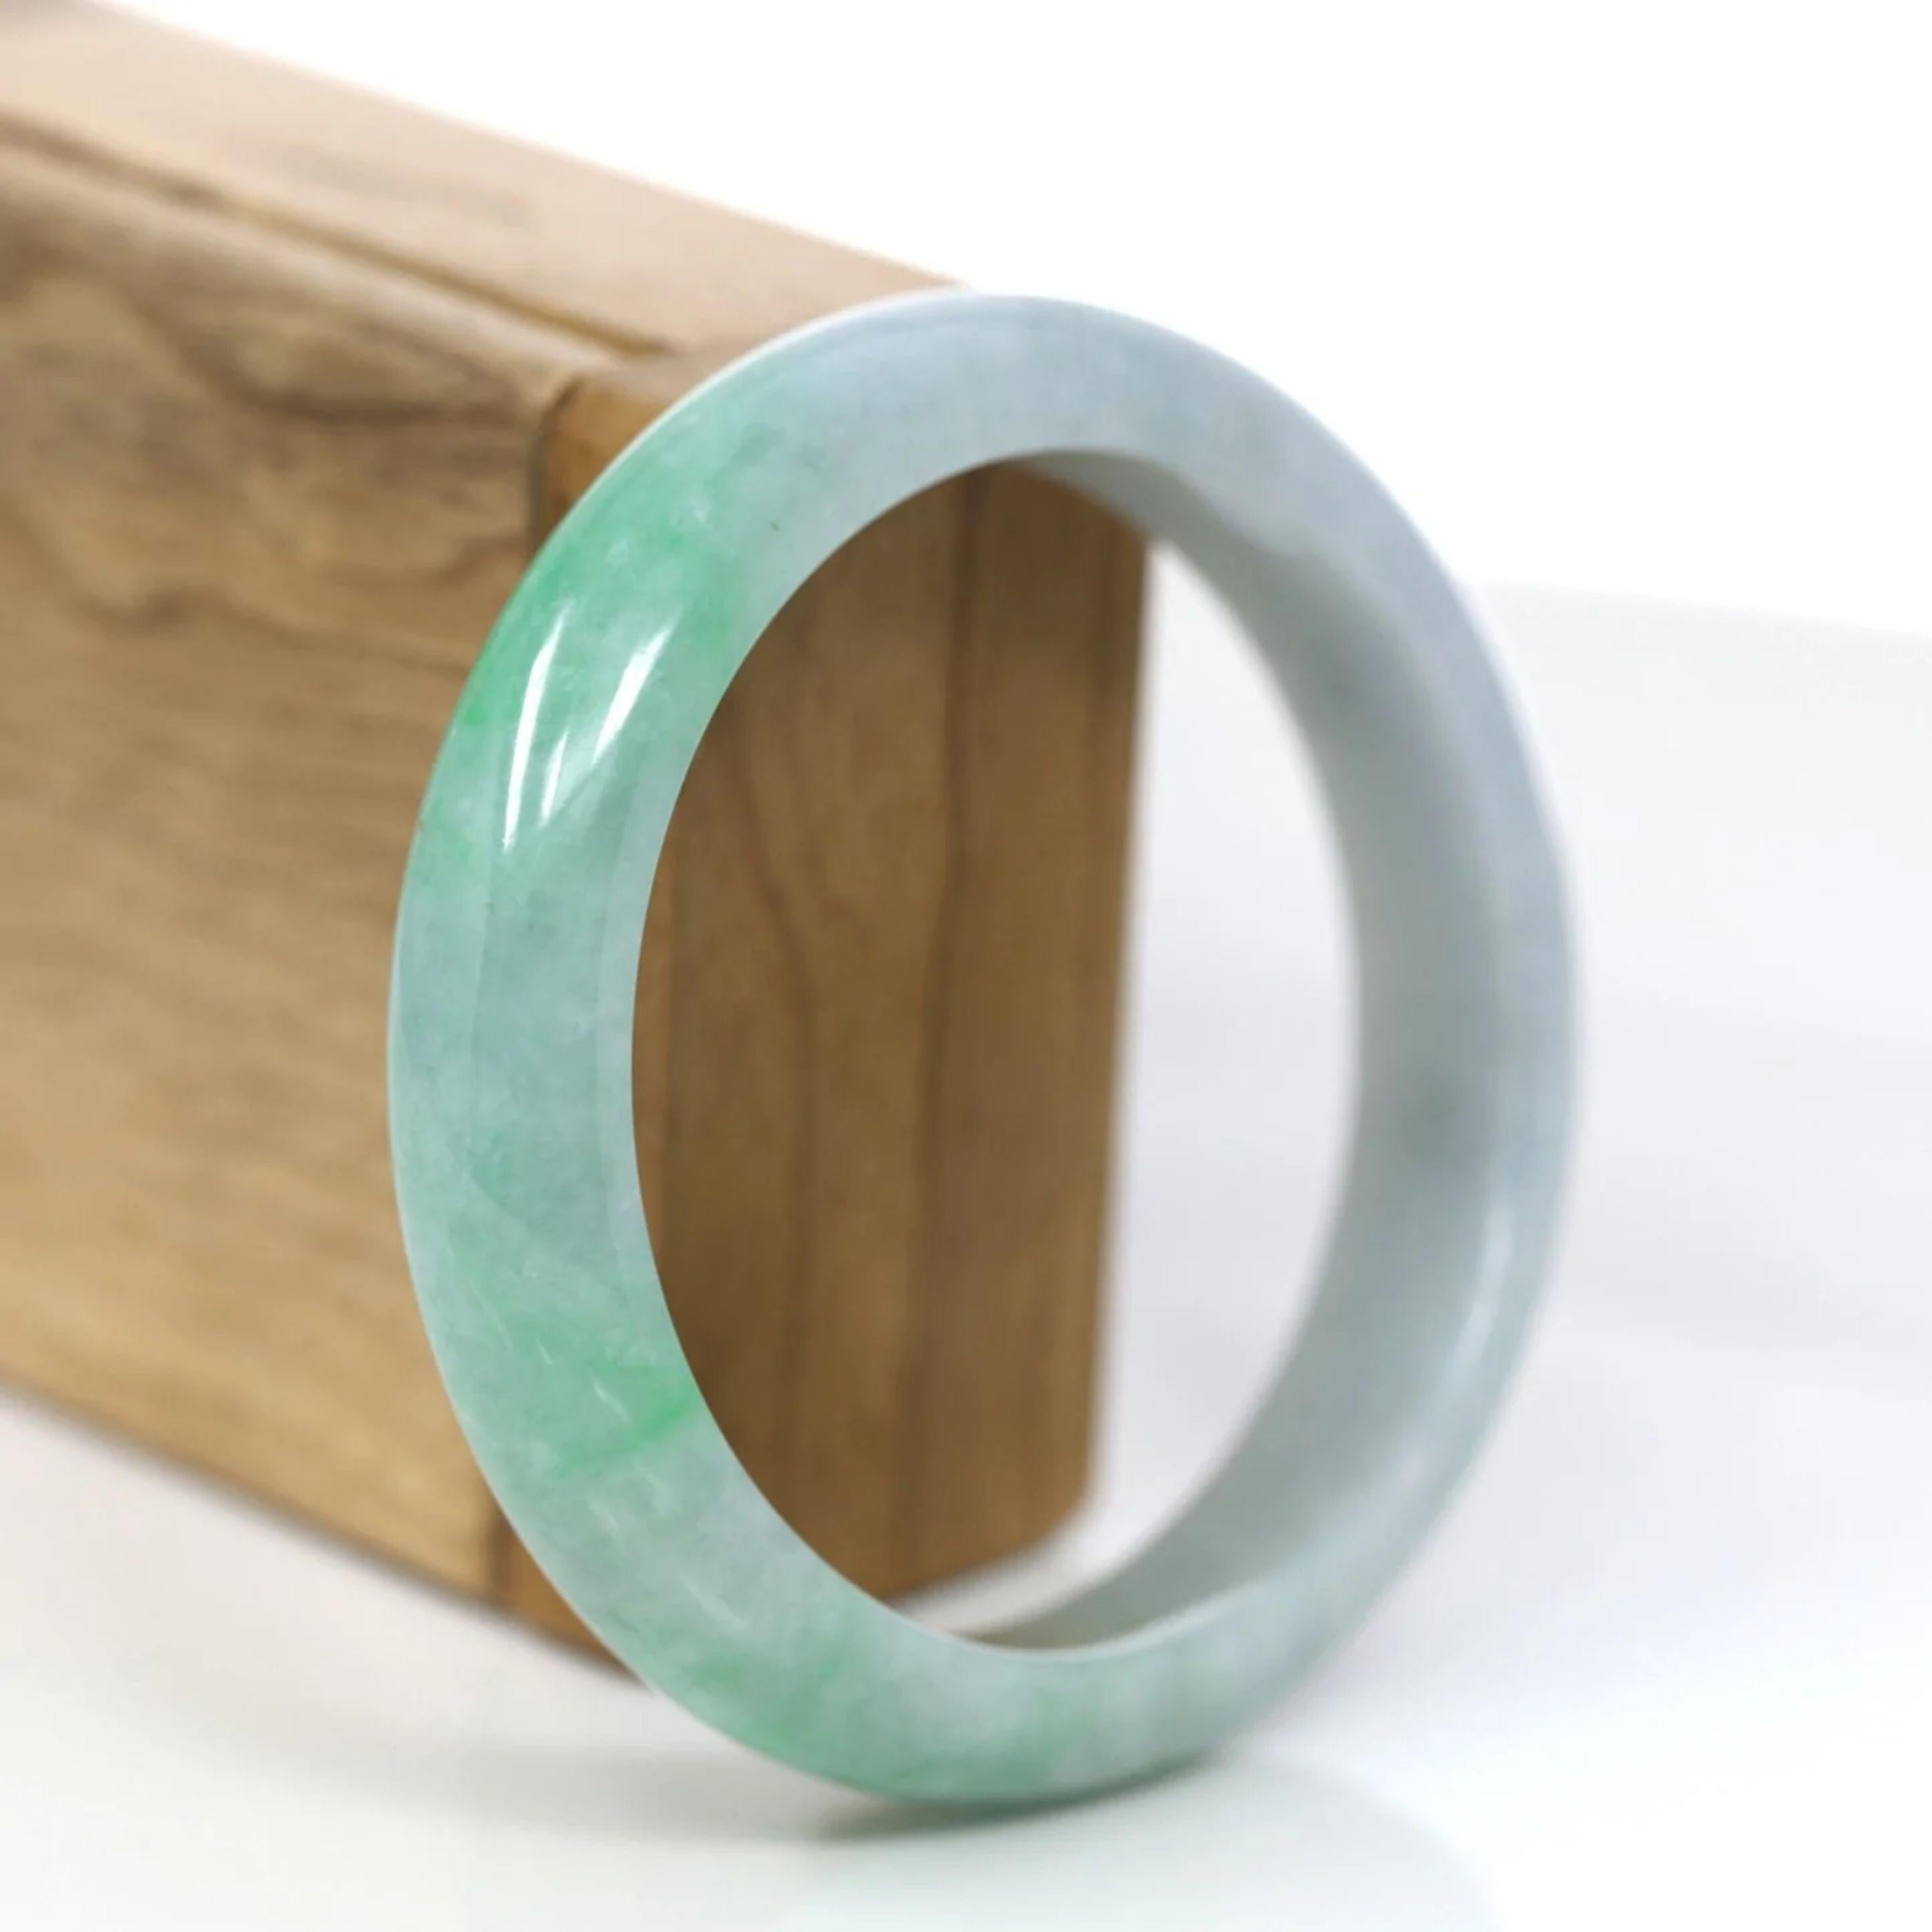 * DETAILS---This bangle is made with high-quality genuine Burmese lavender & green Jadeite jade, the jade texture is transparent with apple green colors. It looks even better in person. This bangle is characterized by beautiful vibrant green